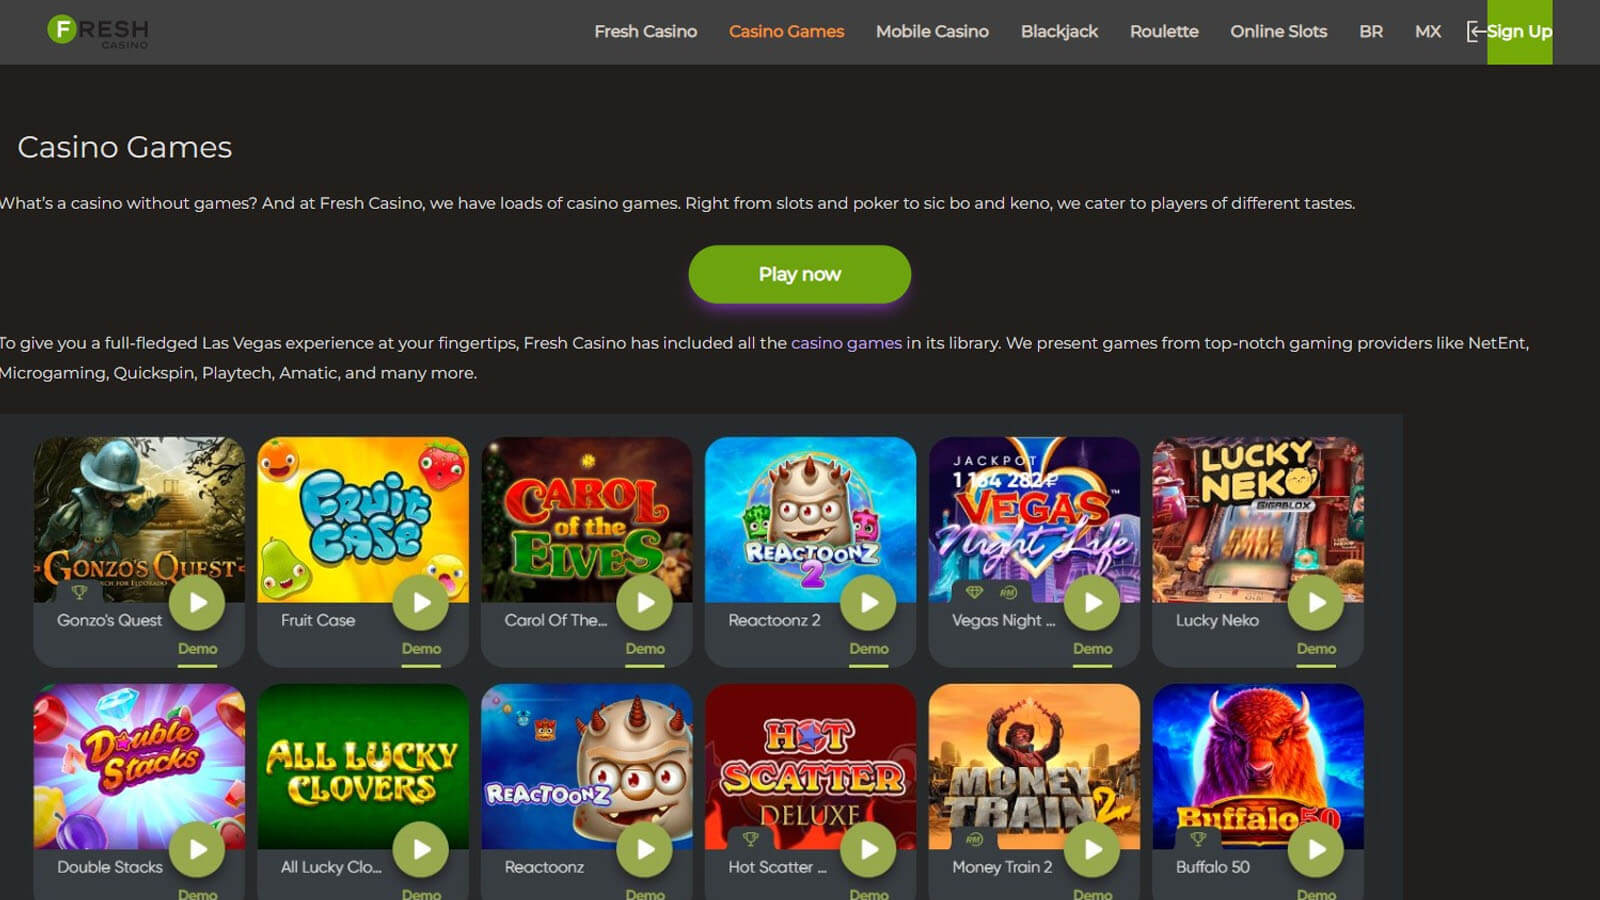 Fresh Casino #3. The best Canadian online casino for low-budget play